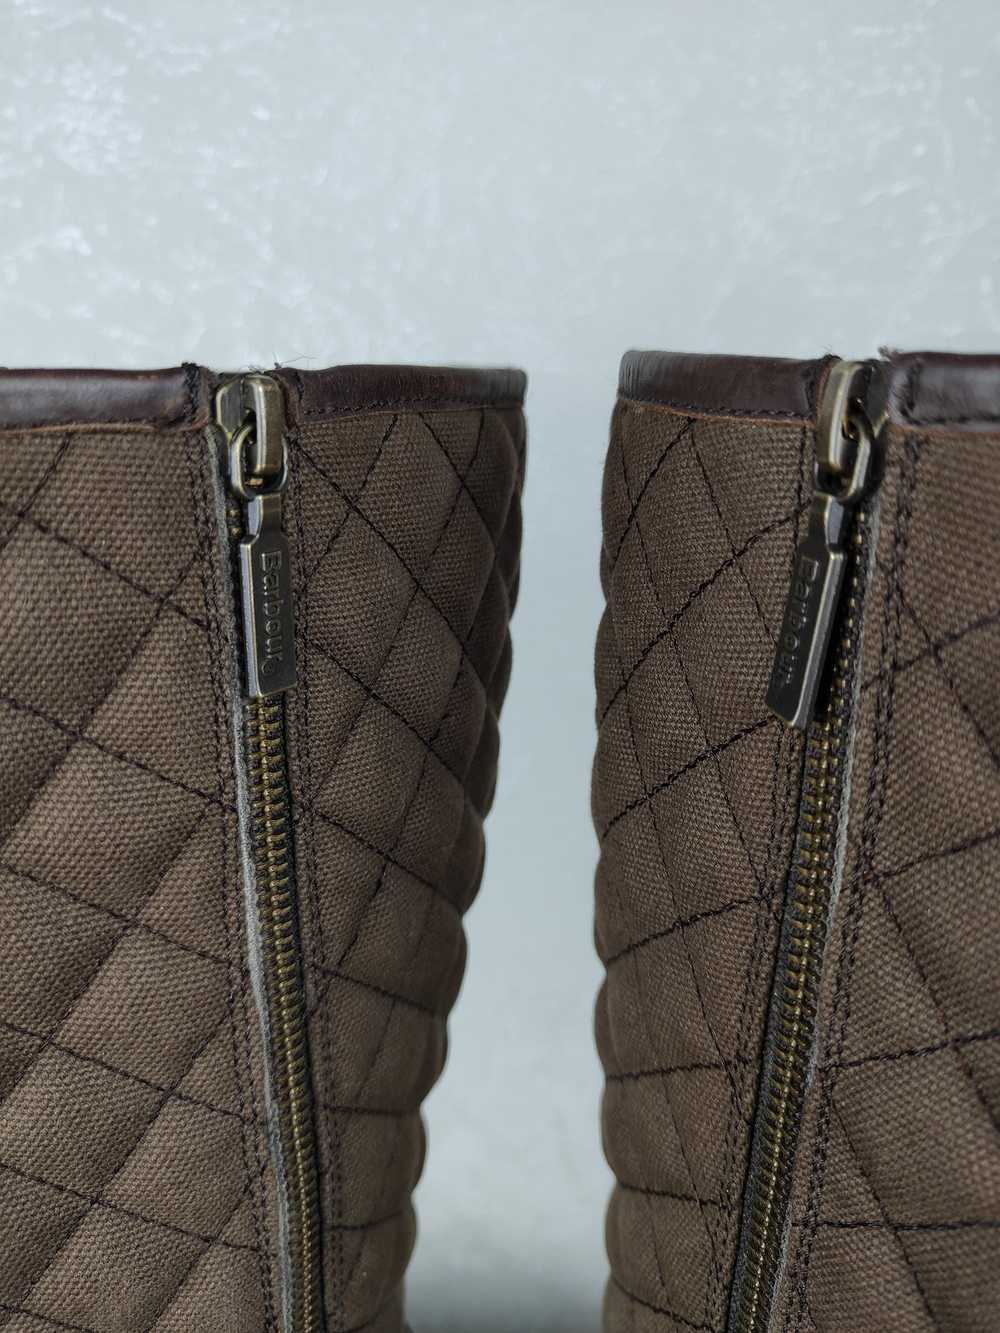 Barbour Barbour International Quilted Boots - image 10